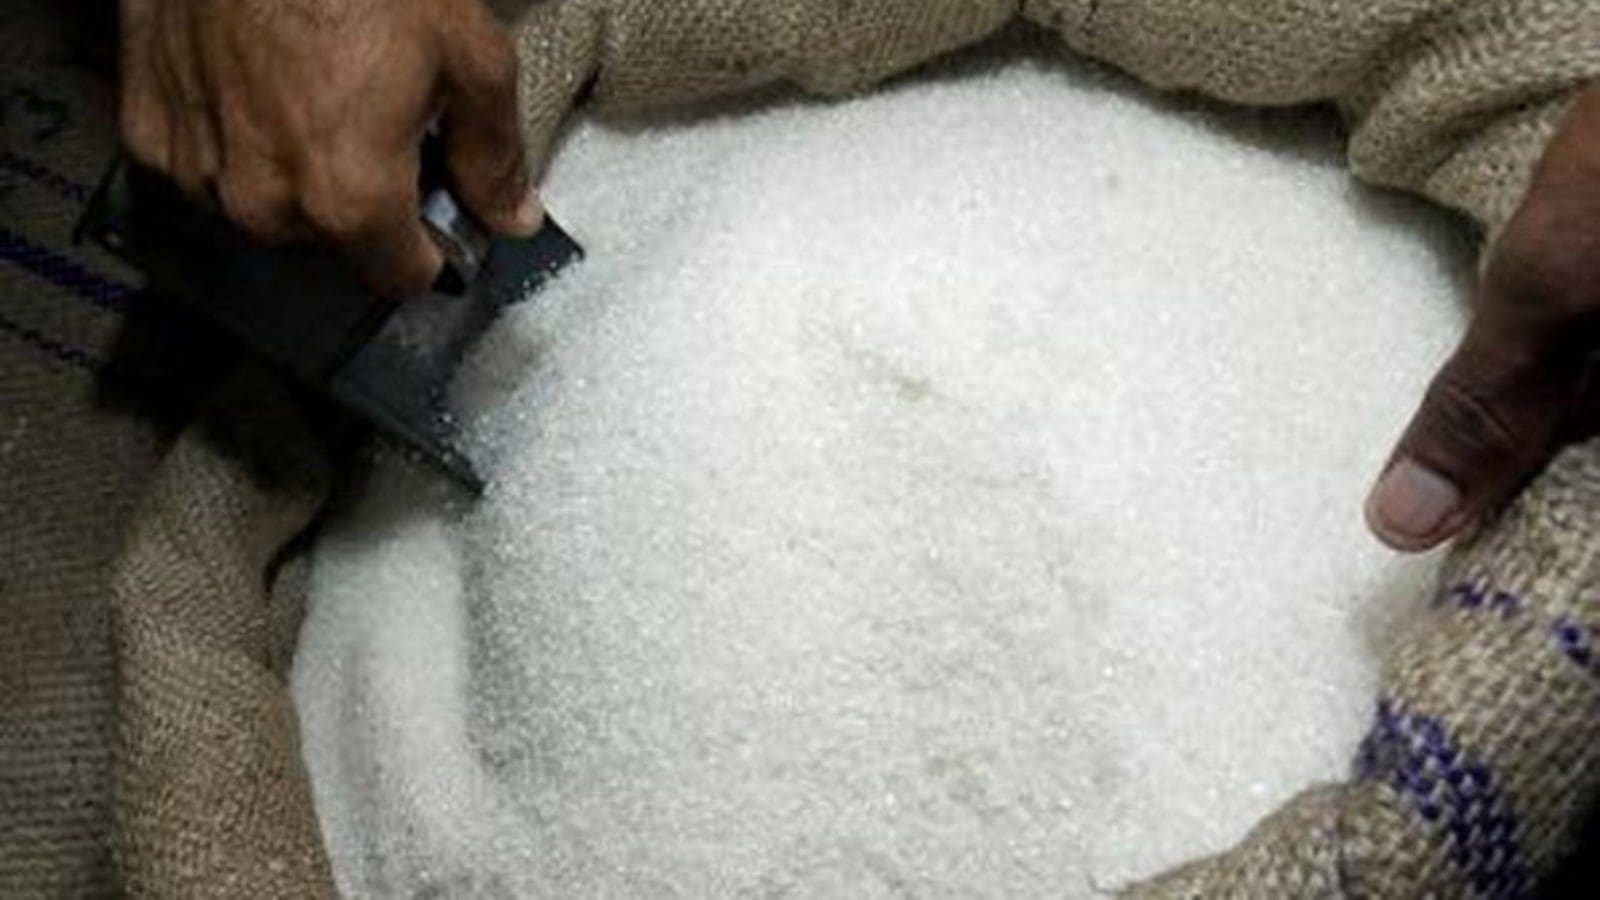 Sugar imports to Kenya rose 22% in February, India and Madagascar account for 80%